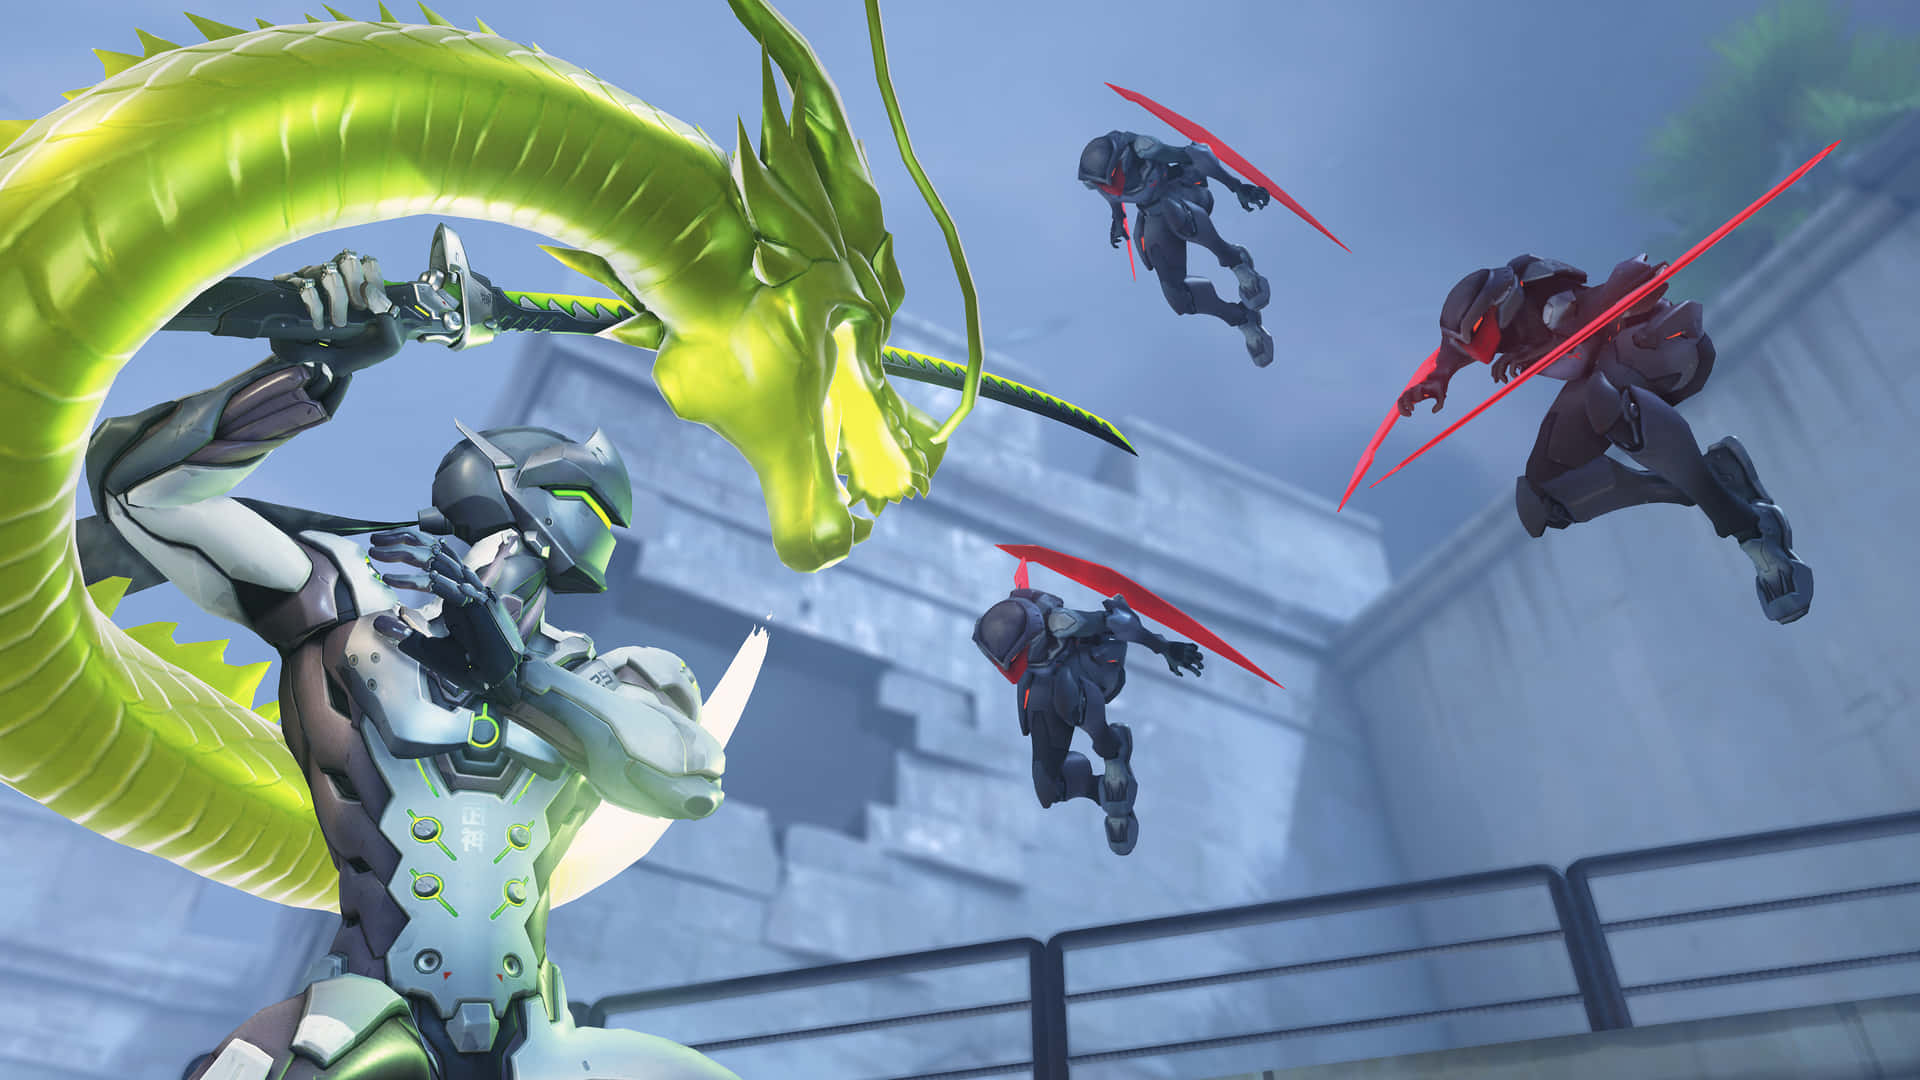 Ready your shuriken and jump into the action with Genji 4K Wallpaper